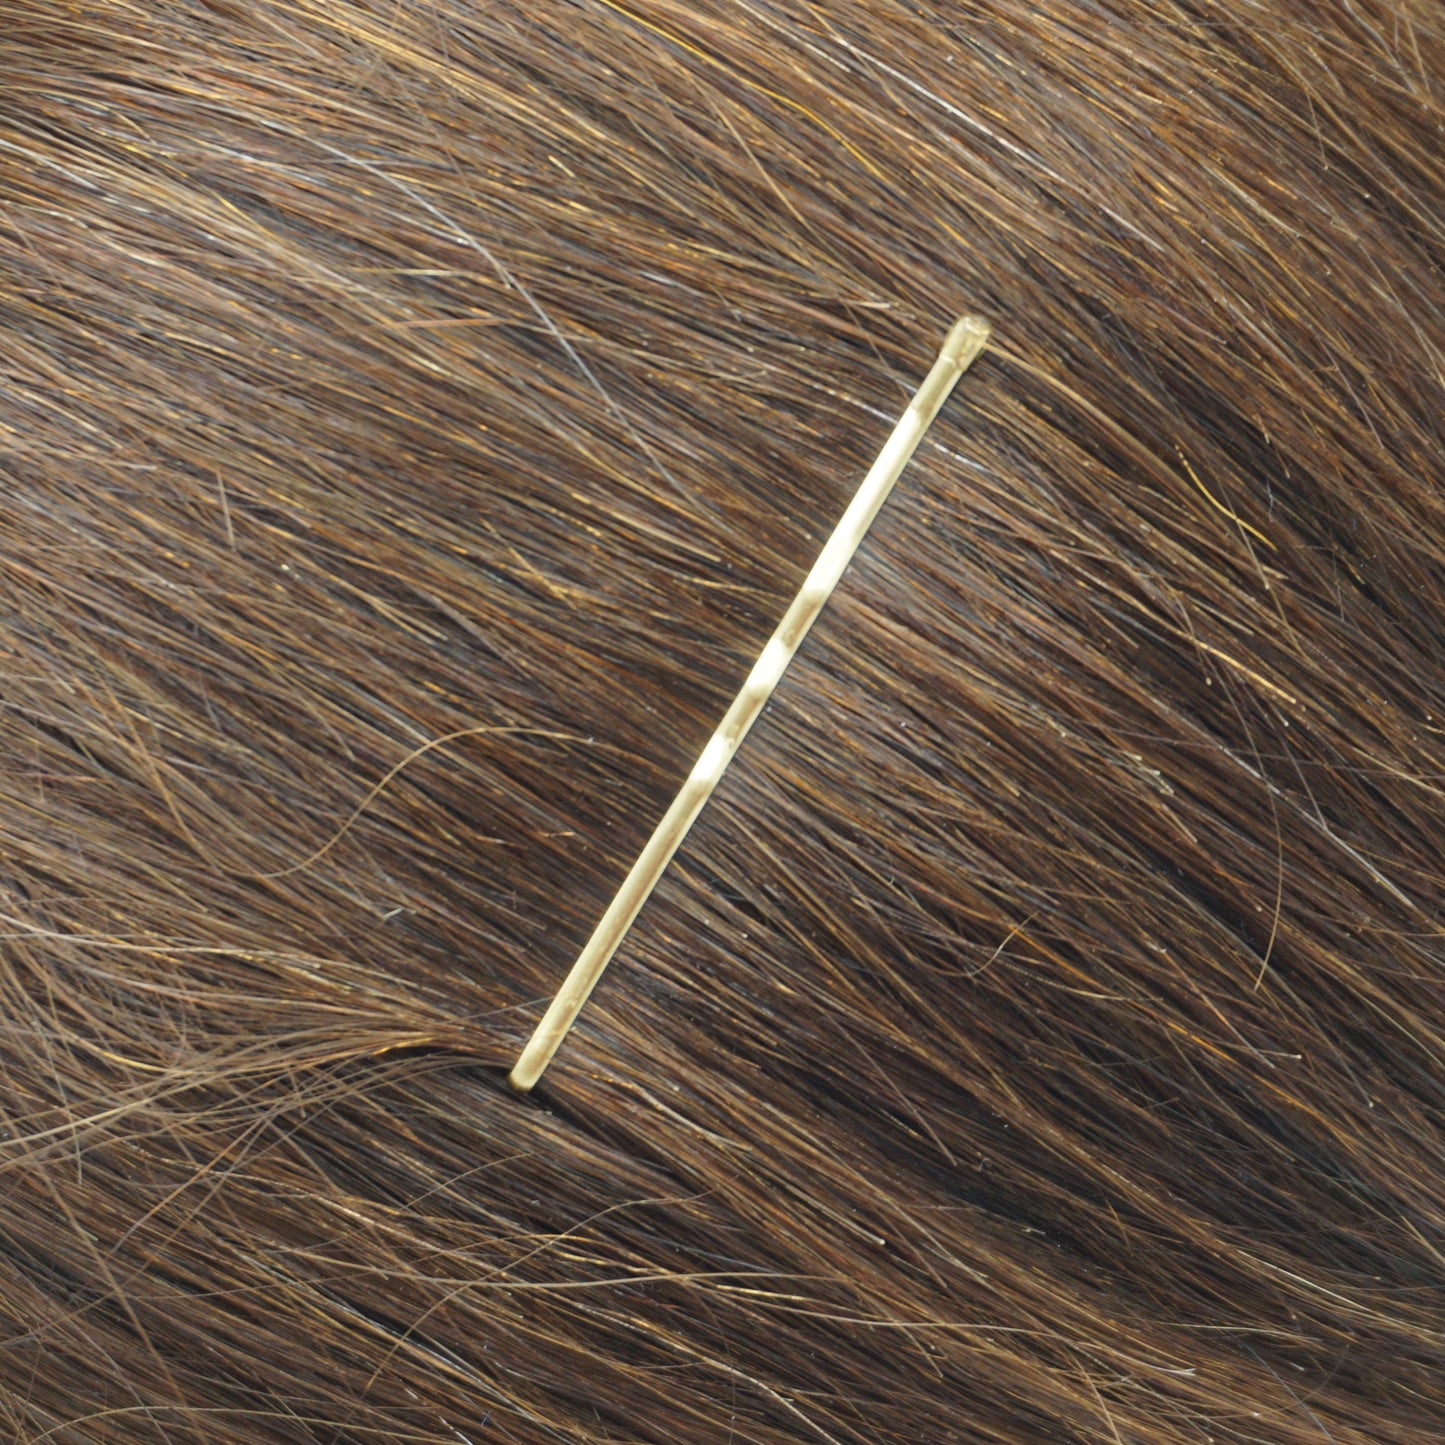 300, Brass Color, 2.0in (5.0cm), Italian Made Bobby Pins, Recloseable Stay Clean and Organized Container